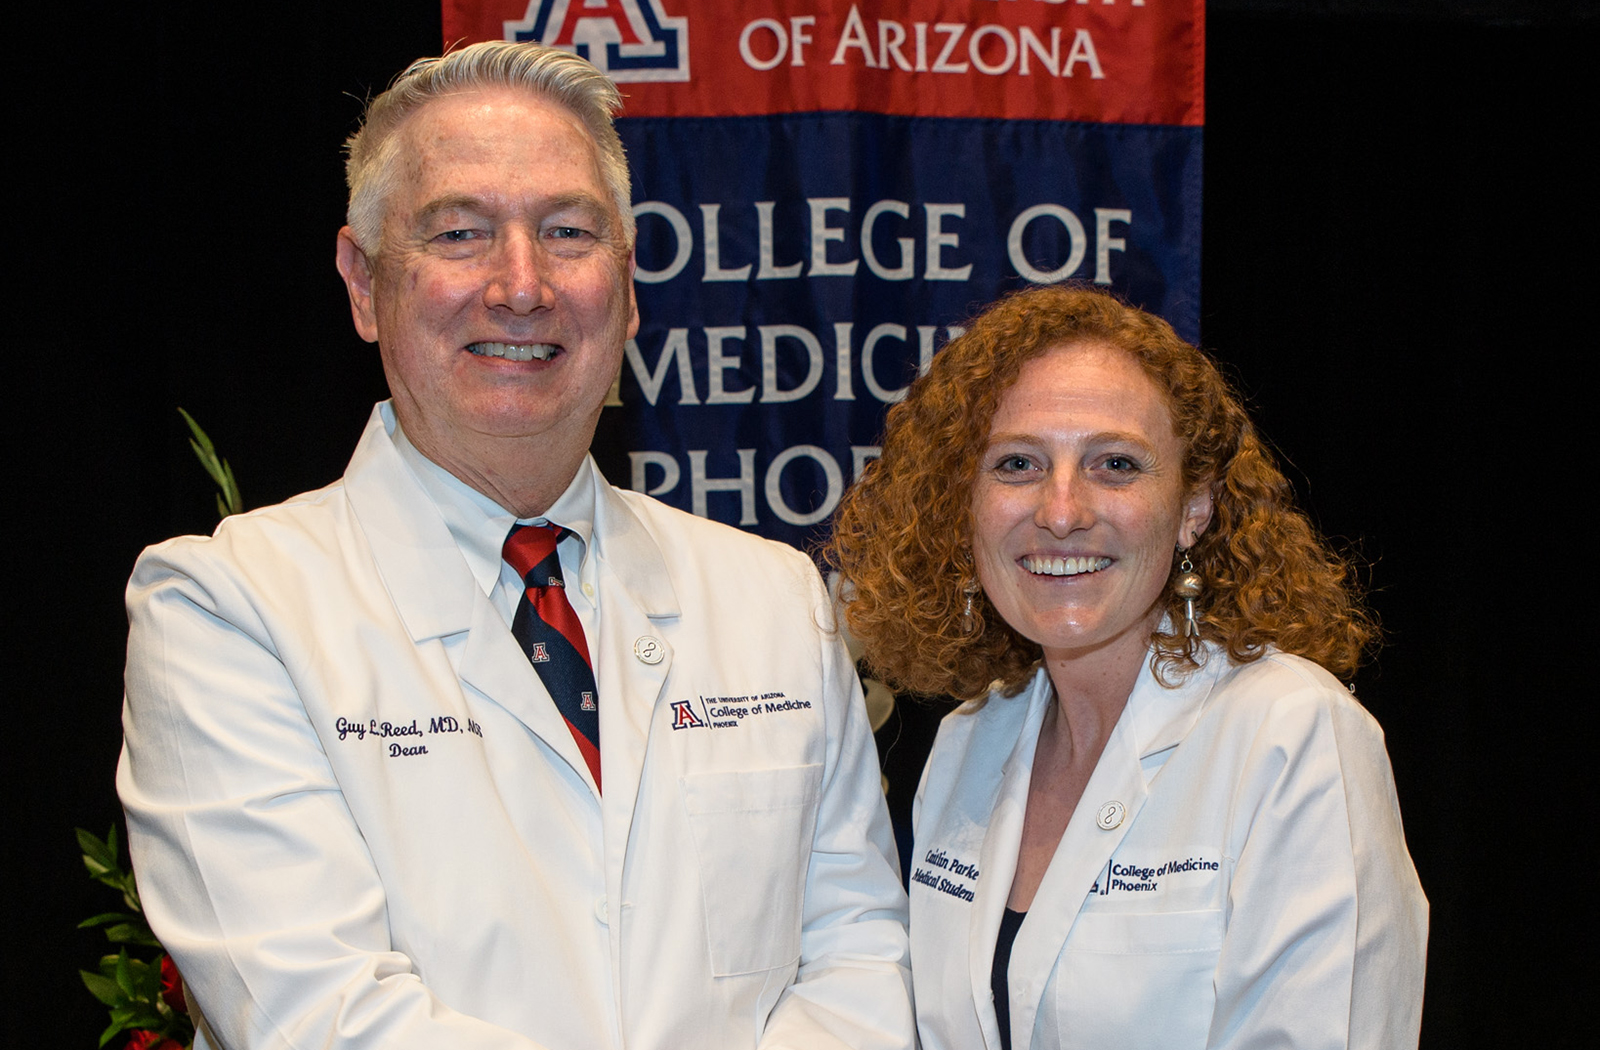 Guy Reed, MD, MS, Dean of the College of Medicine - Phoenix, with medical student Caitlin Parke